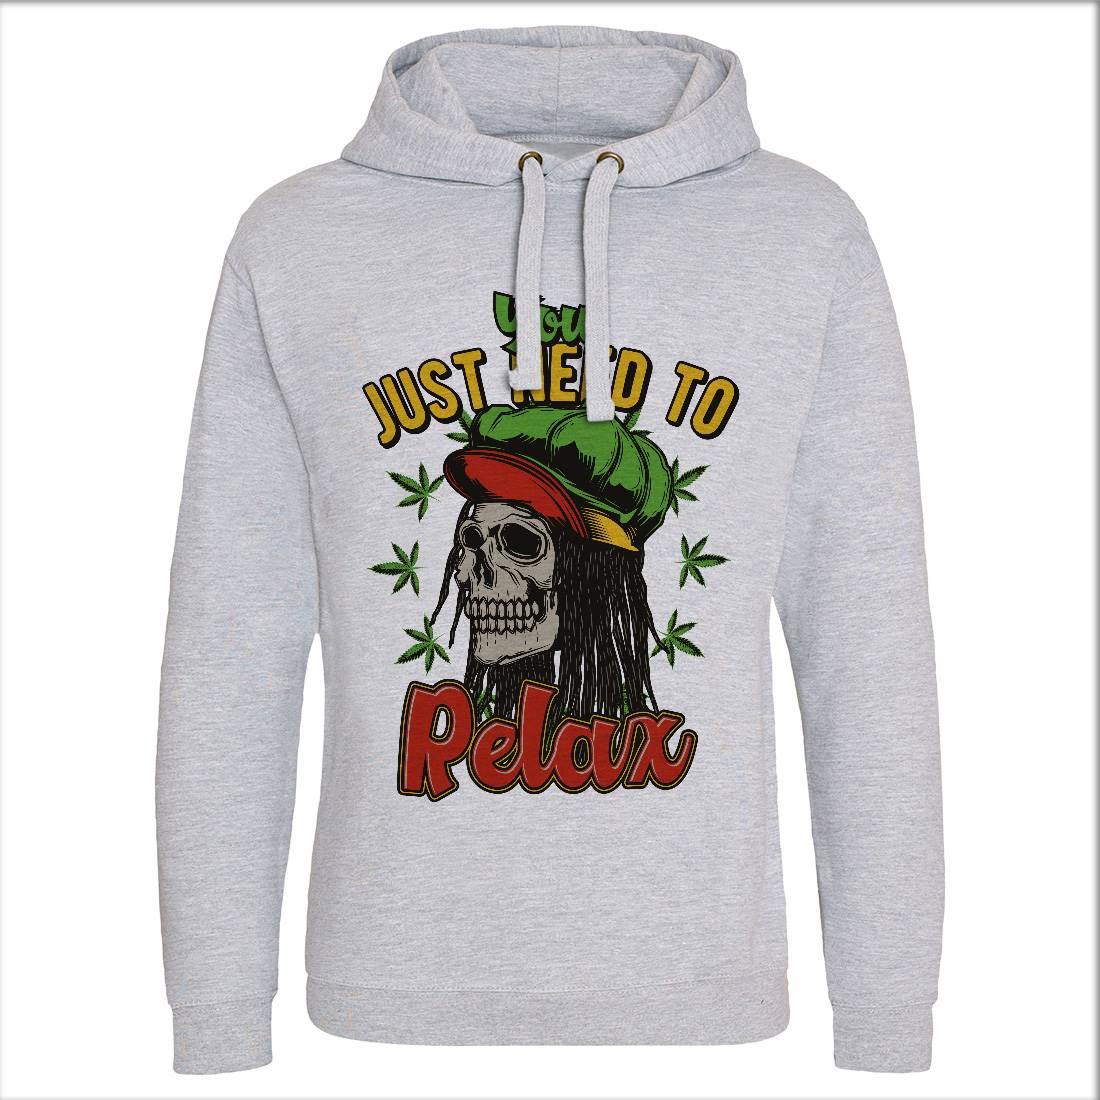 Need To Relax Mens Hoodie Without Pocket Drugs B804